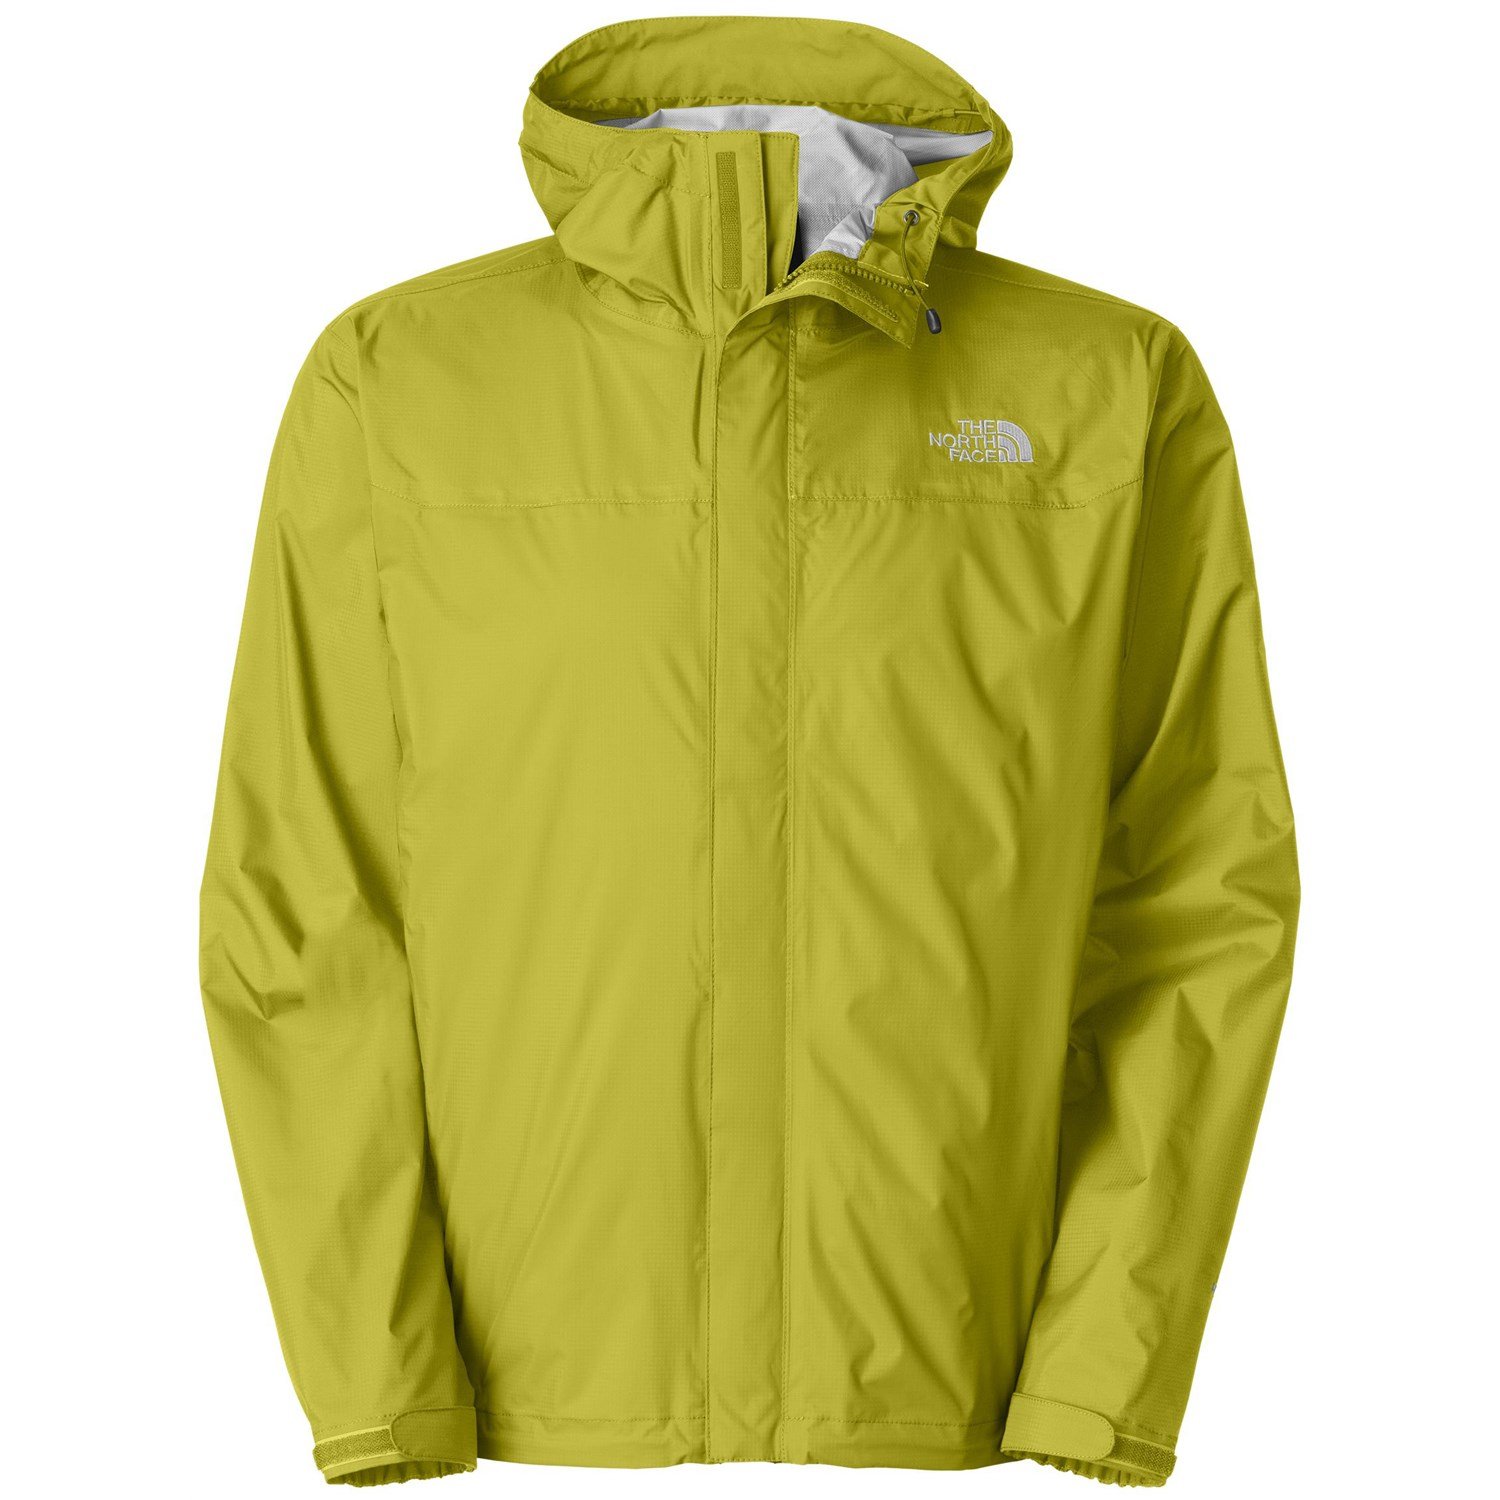 The North Face Venture Jacket | evo